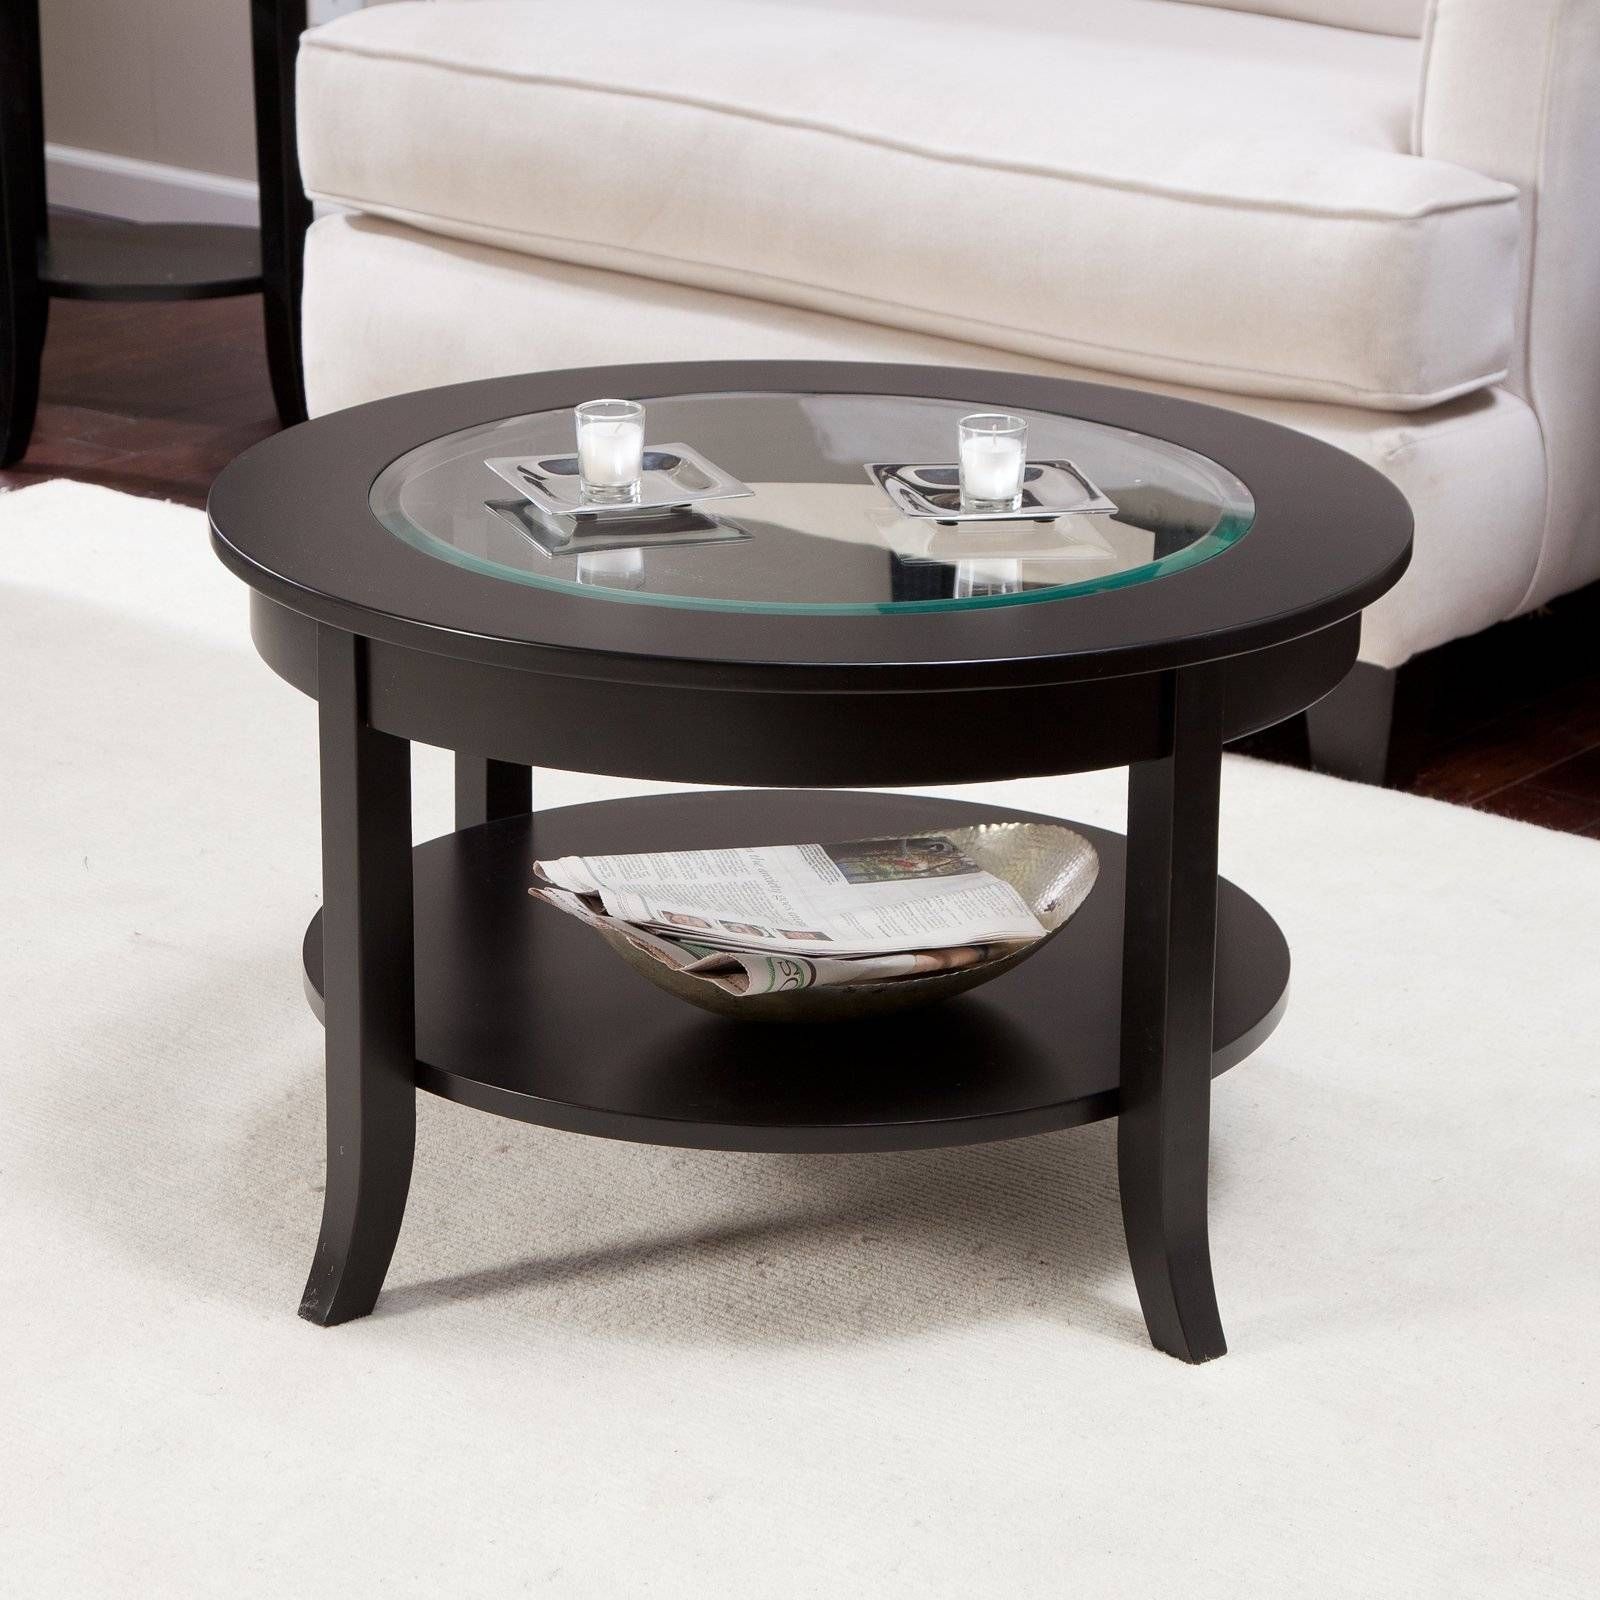 Coffee Table: Unique Circle Coffee Table Ideas Glass Circle Coffee Pertaining To Glass Circle Coffee Tables (View 6 of 30)